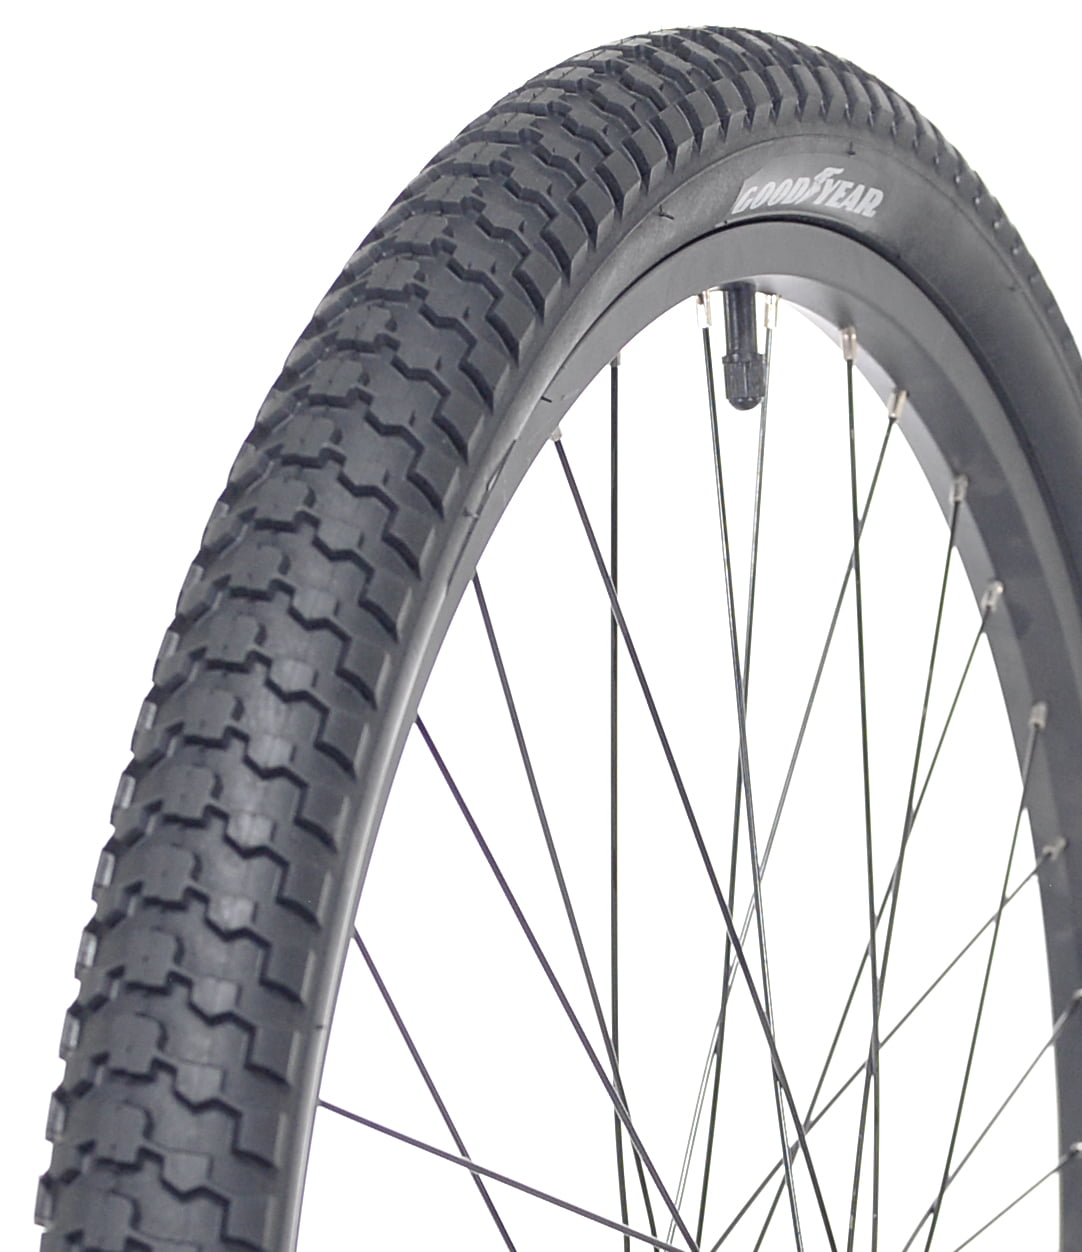 2x 27.5 Inch Goodyear Folding Bicycle Tire Fits Mountain Bike for sale online 